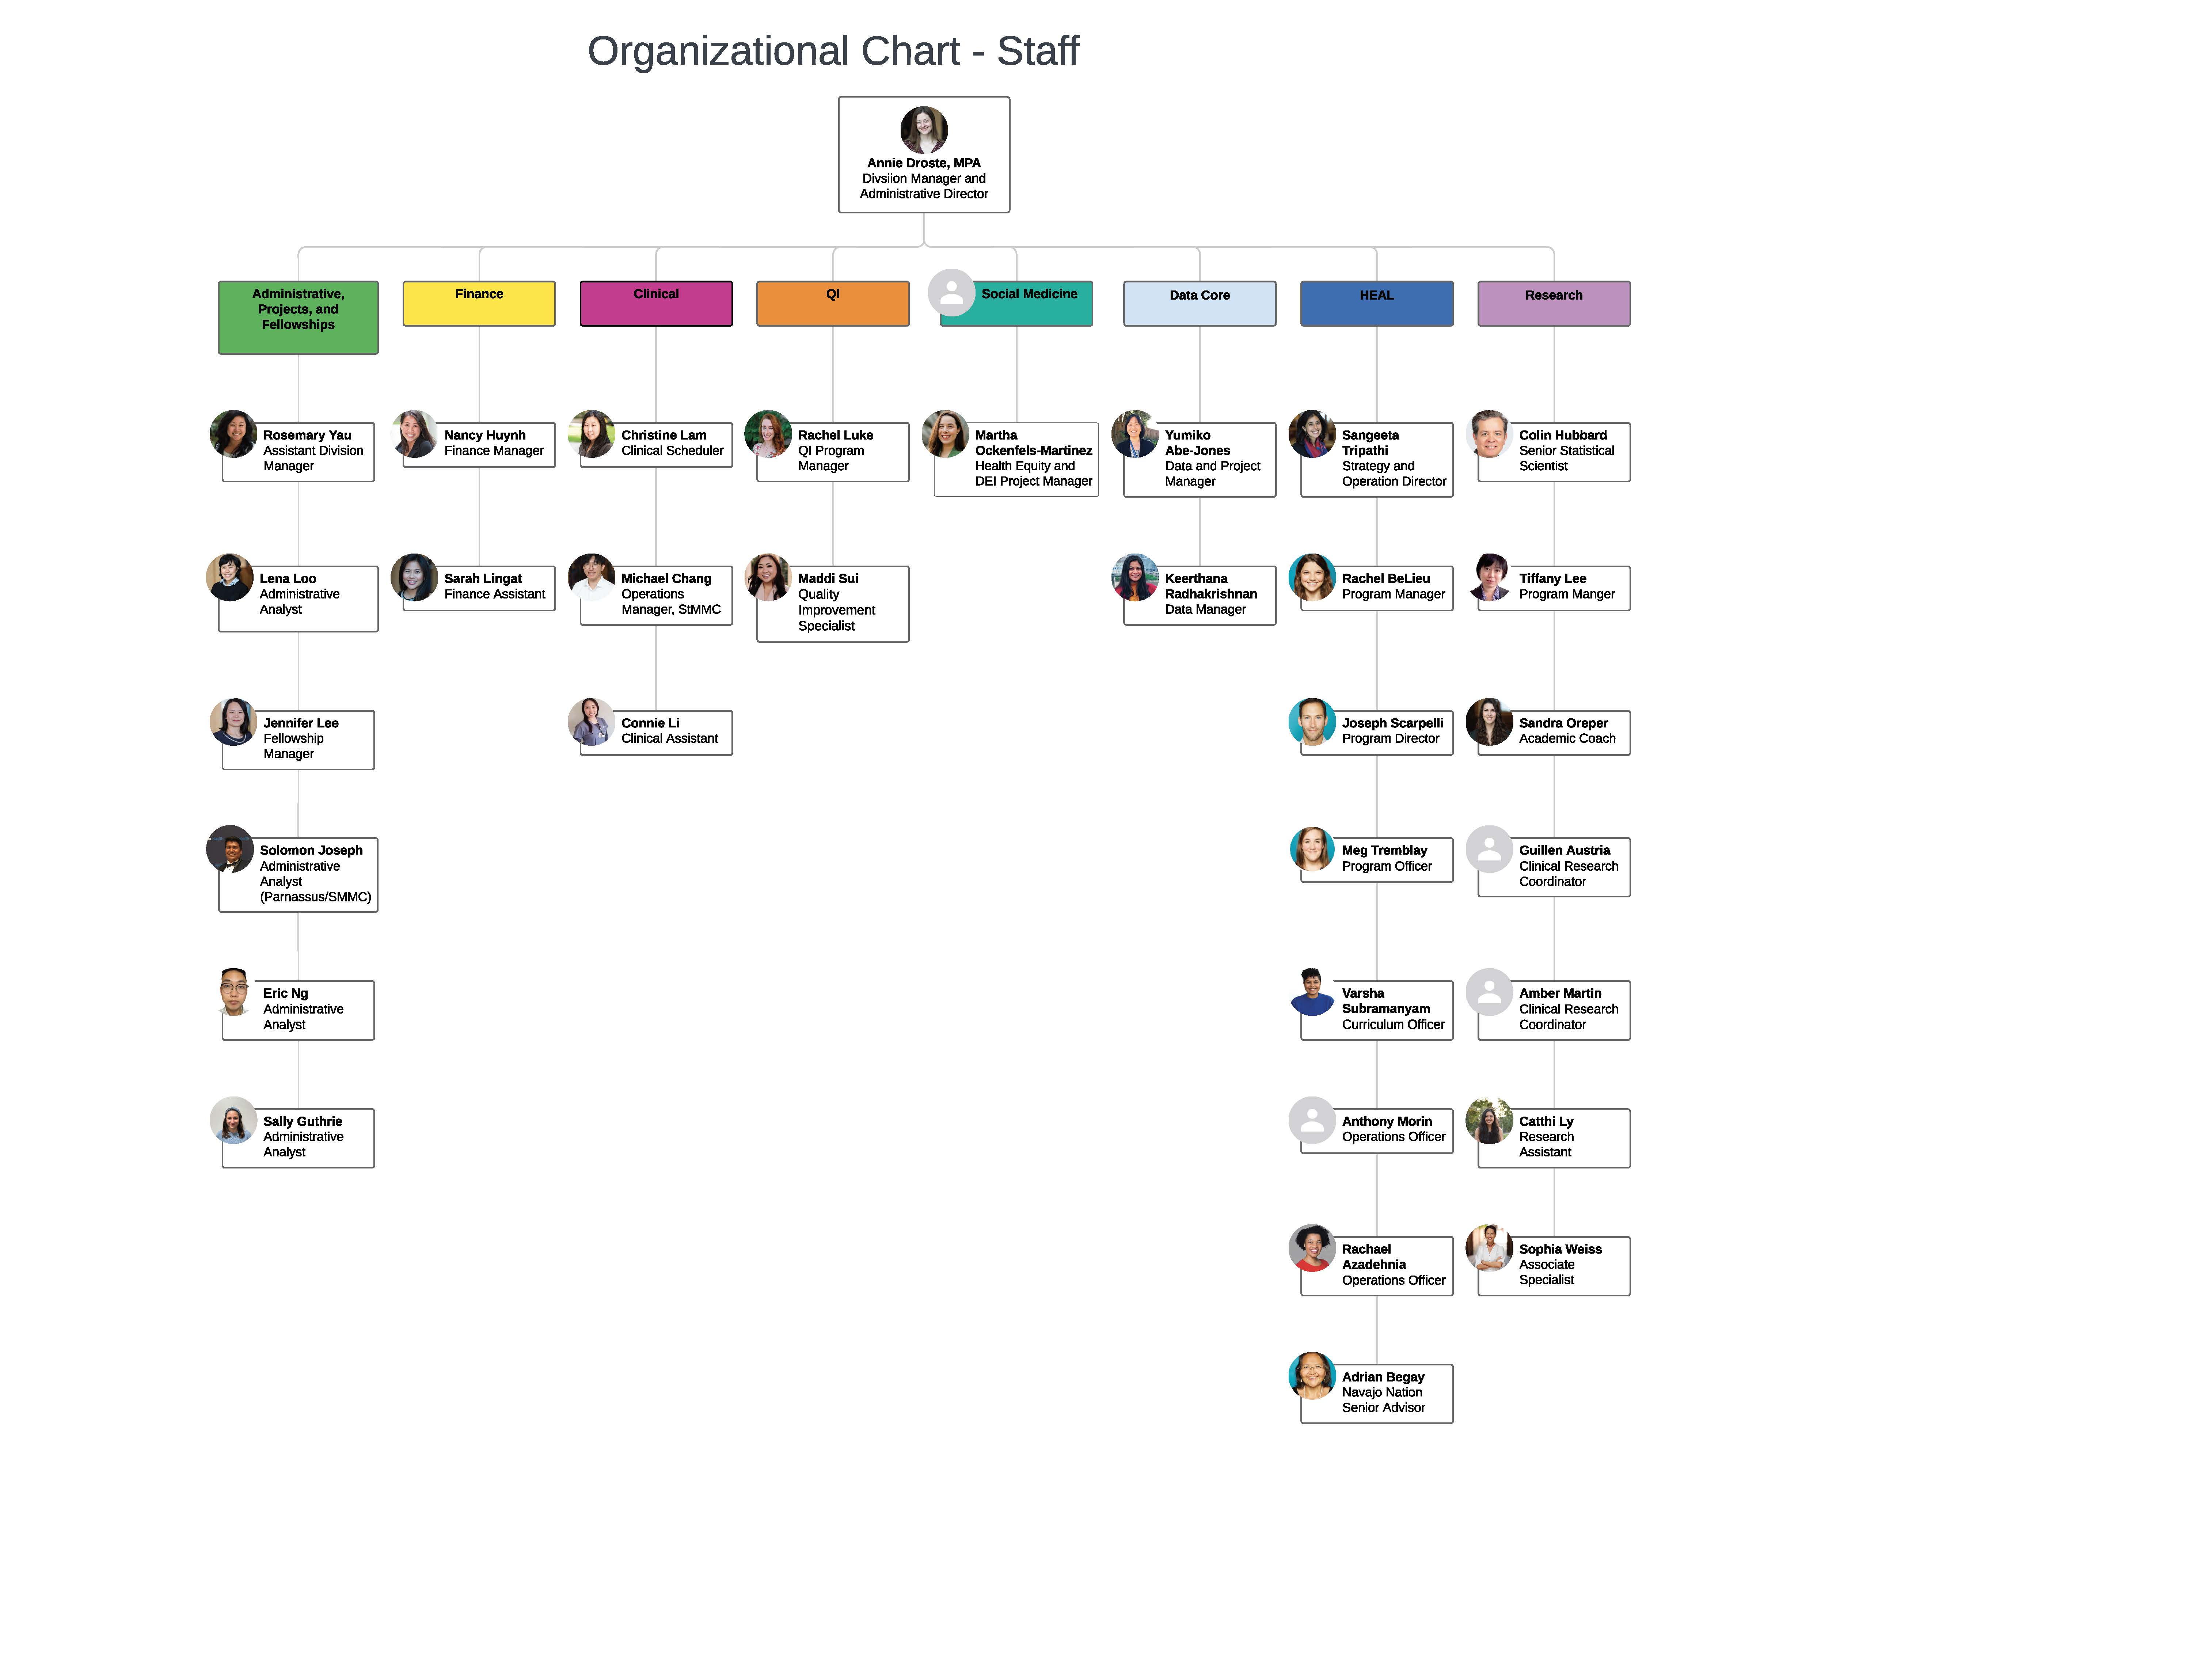 Image of staff org chart